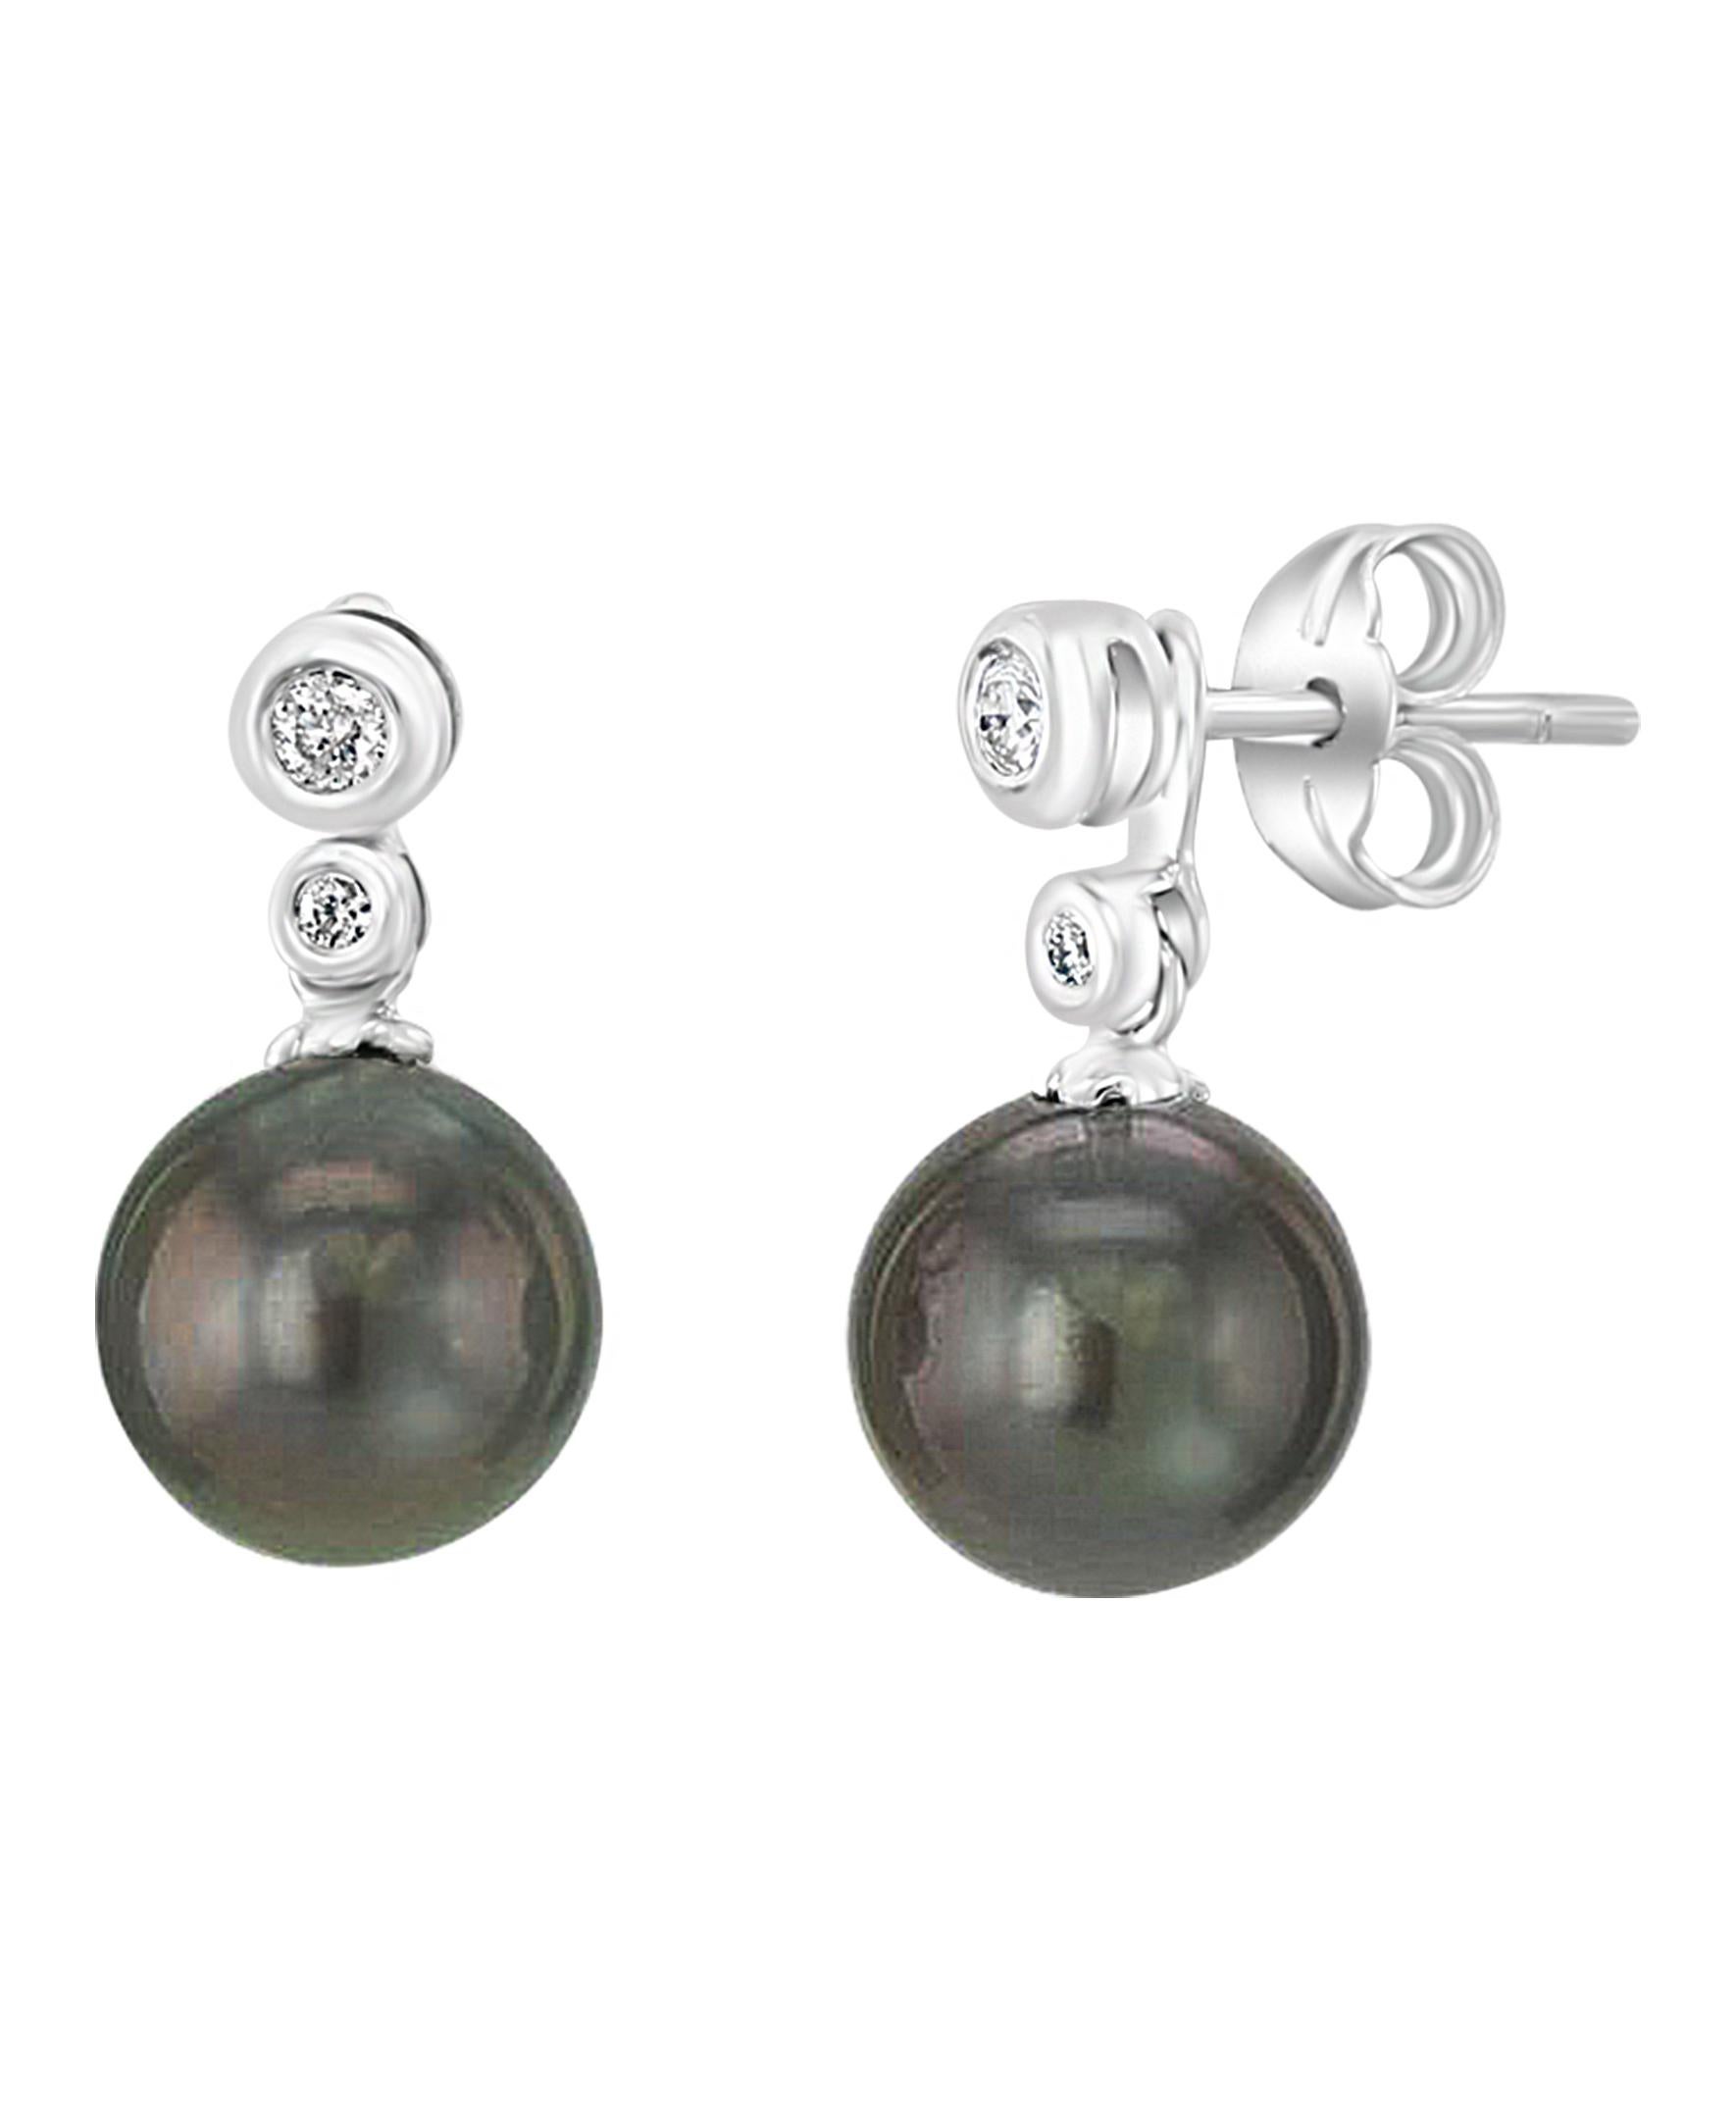 These elegant Diamond and Pearl earrings contain lustrous South Sea Tahitian dark gray round cultured pearls with a green tint to them. The Pearls measuring 7-8mm are dangling from two diamonds totaling 0.08 carats set in 14K white gold bezels. The